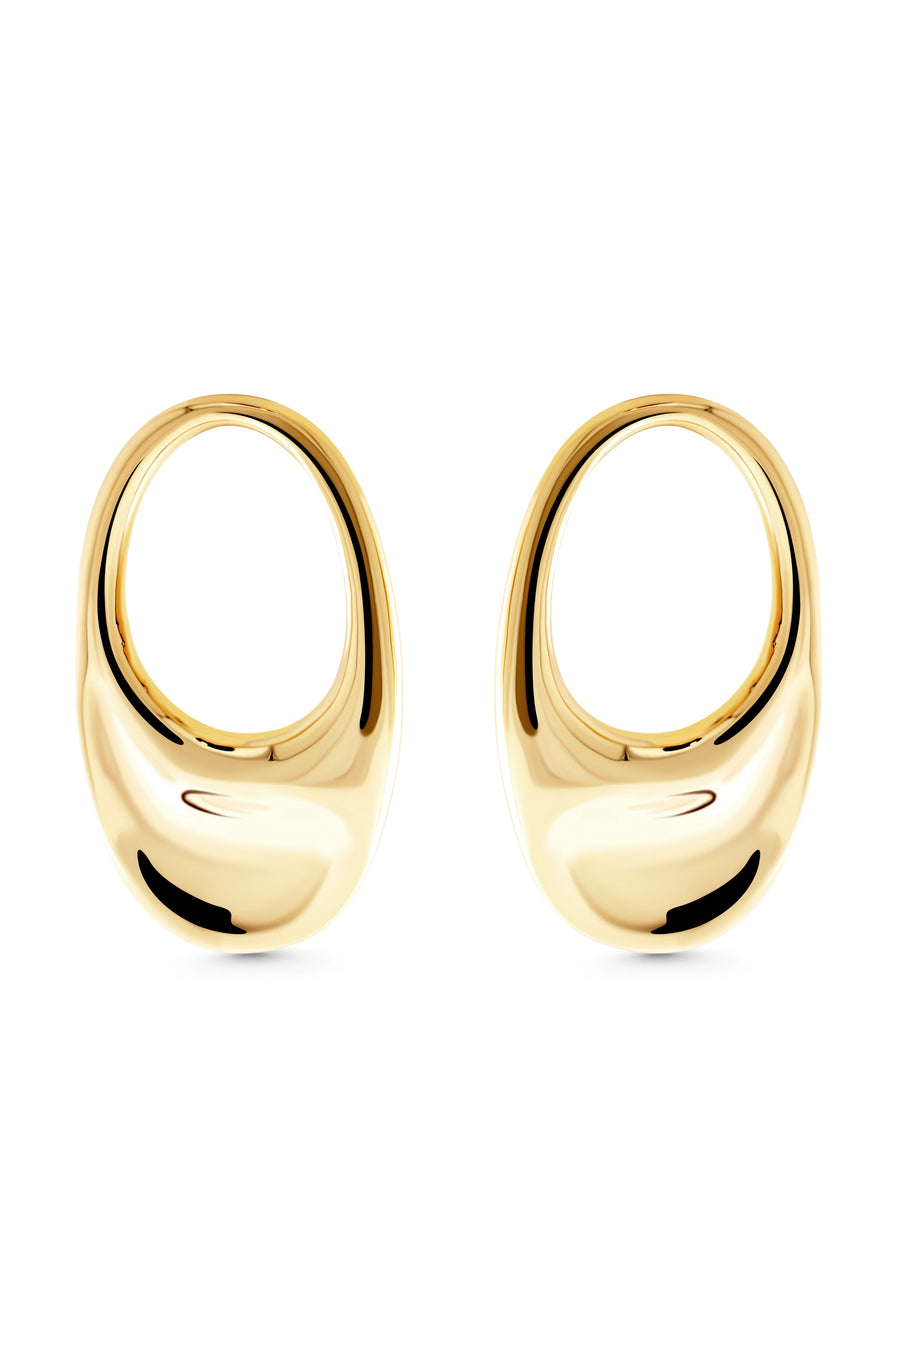 BEAMISH Hoops. Oval-shaped disc earrings in high gloss finish, 18K gold vermeil, handmade, hypoallergenic, water-resistant